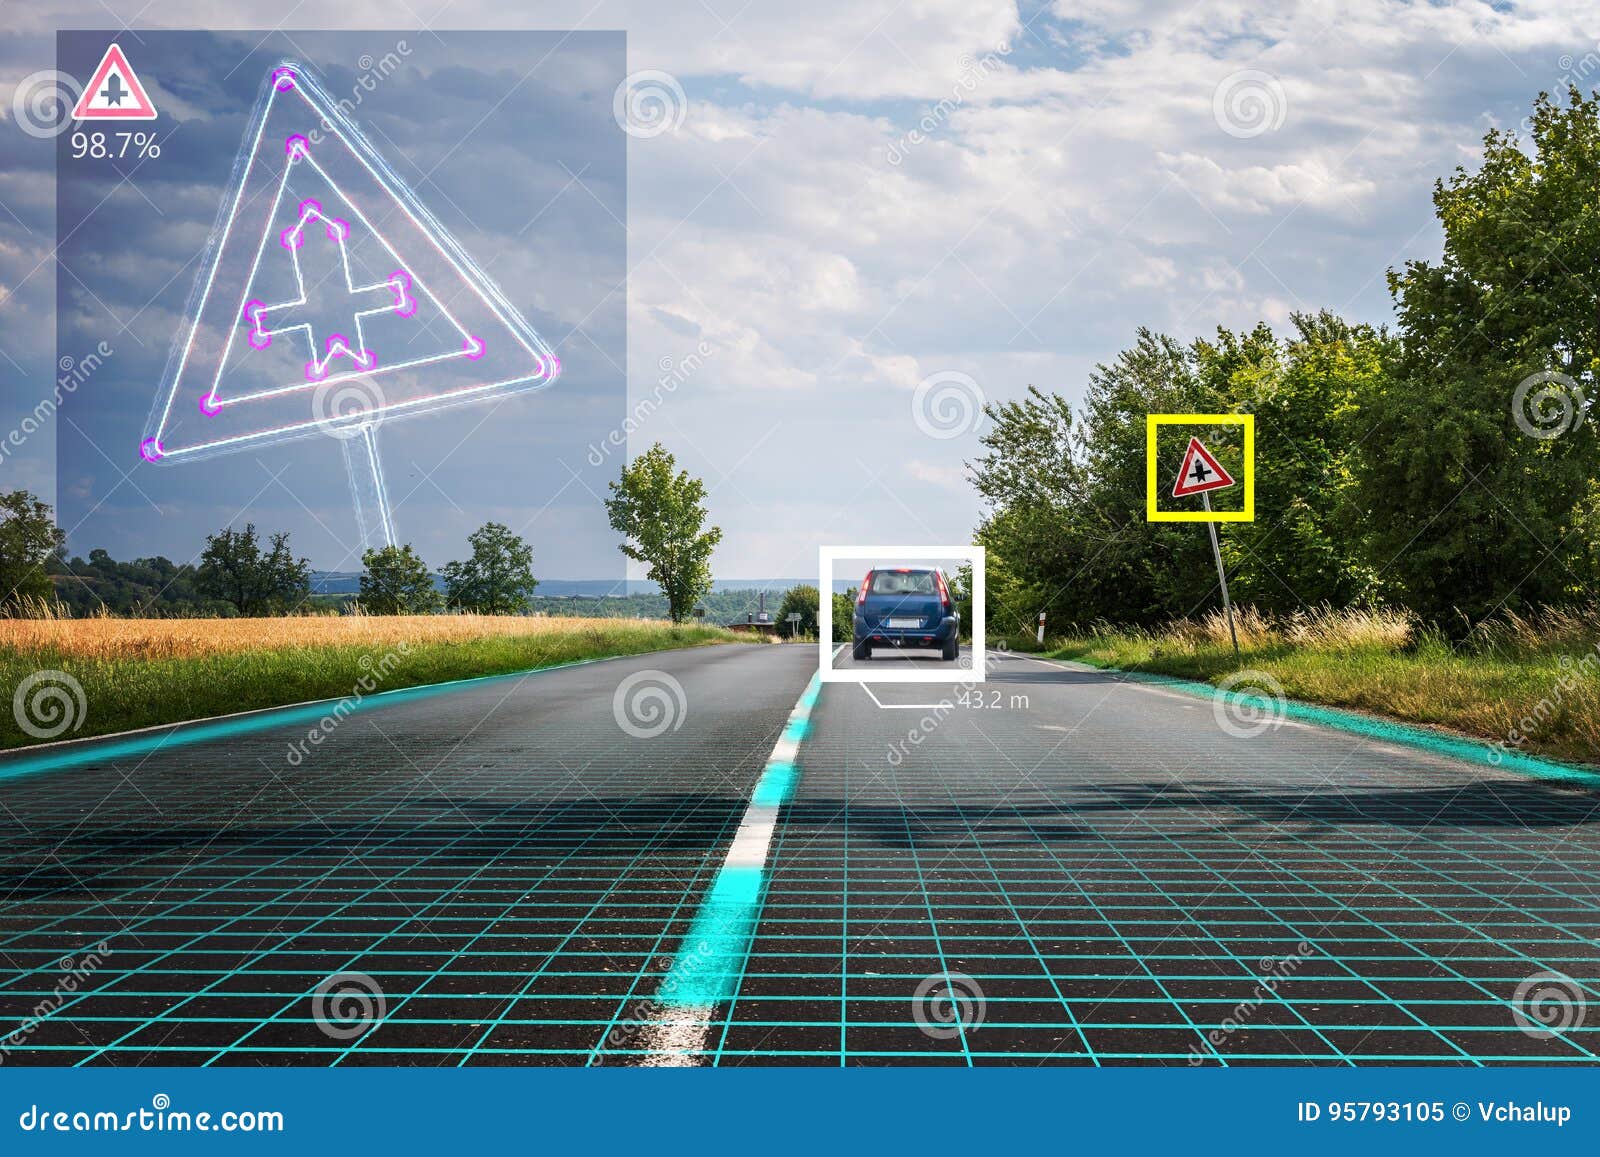 autonomous self-driving car is recognizing road signs. computer vision and artificial intelligence concept